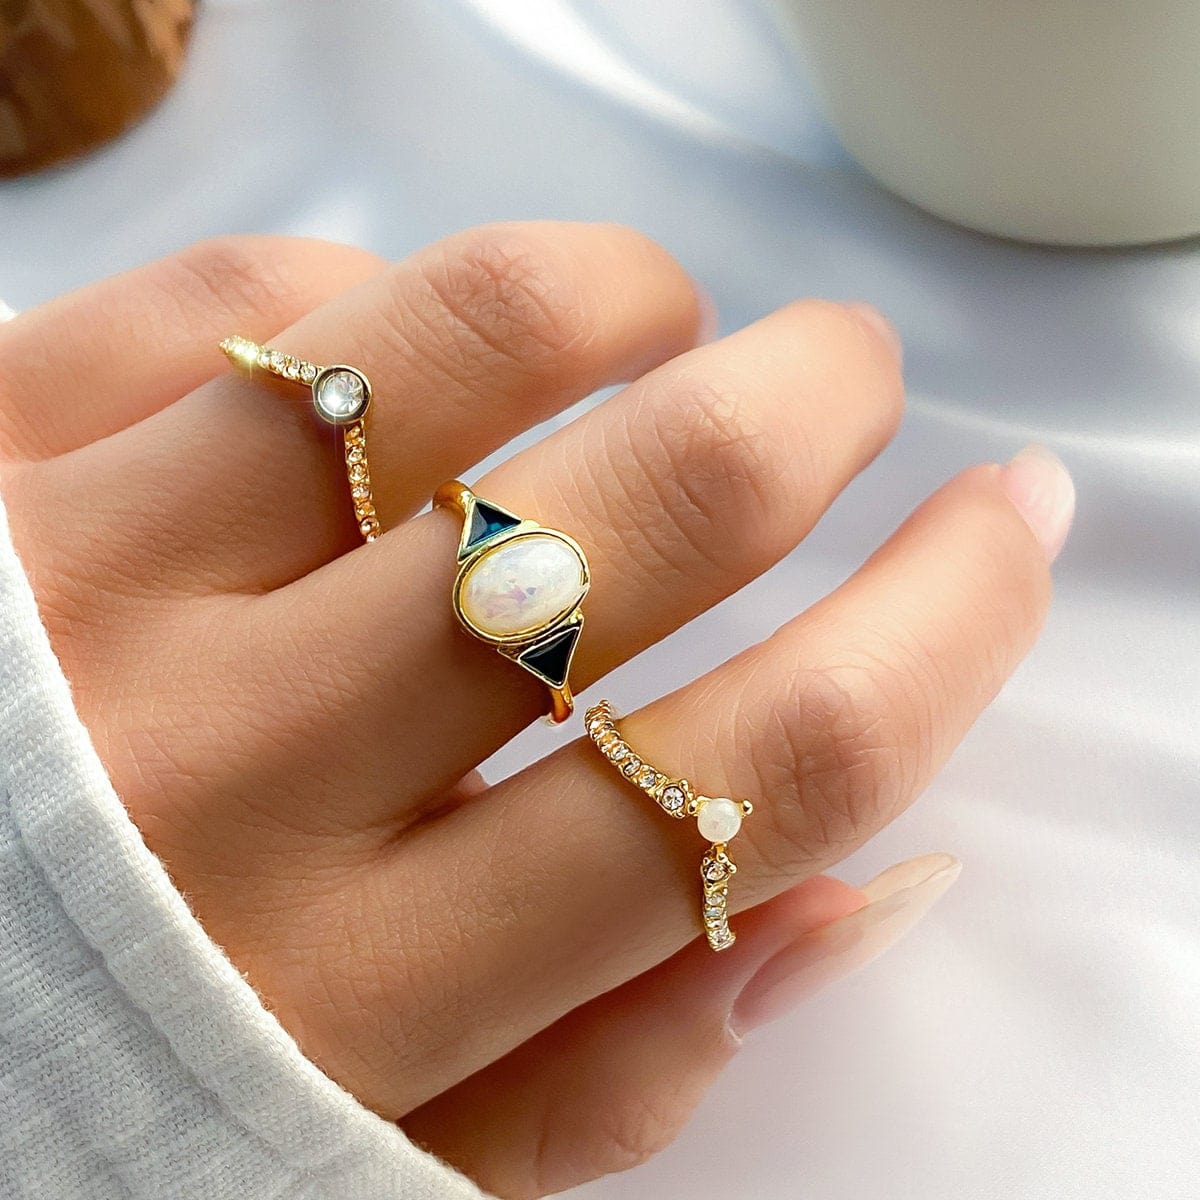 Chic CZ Inlaid 3 In 1 Pearl Charm Ring Set